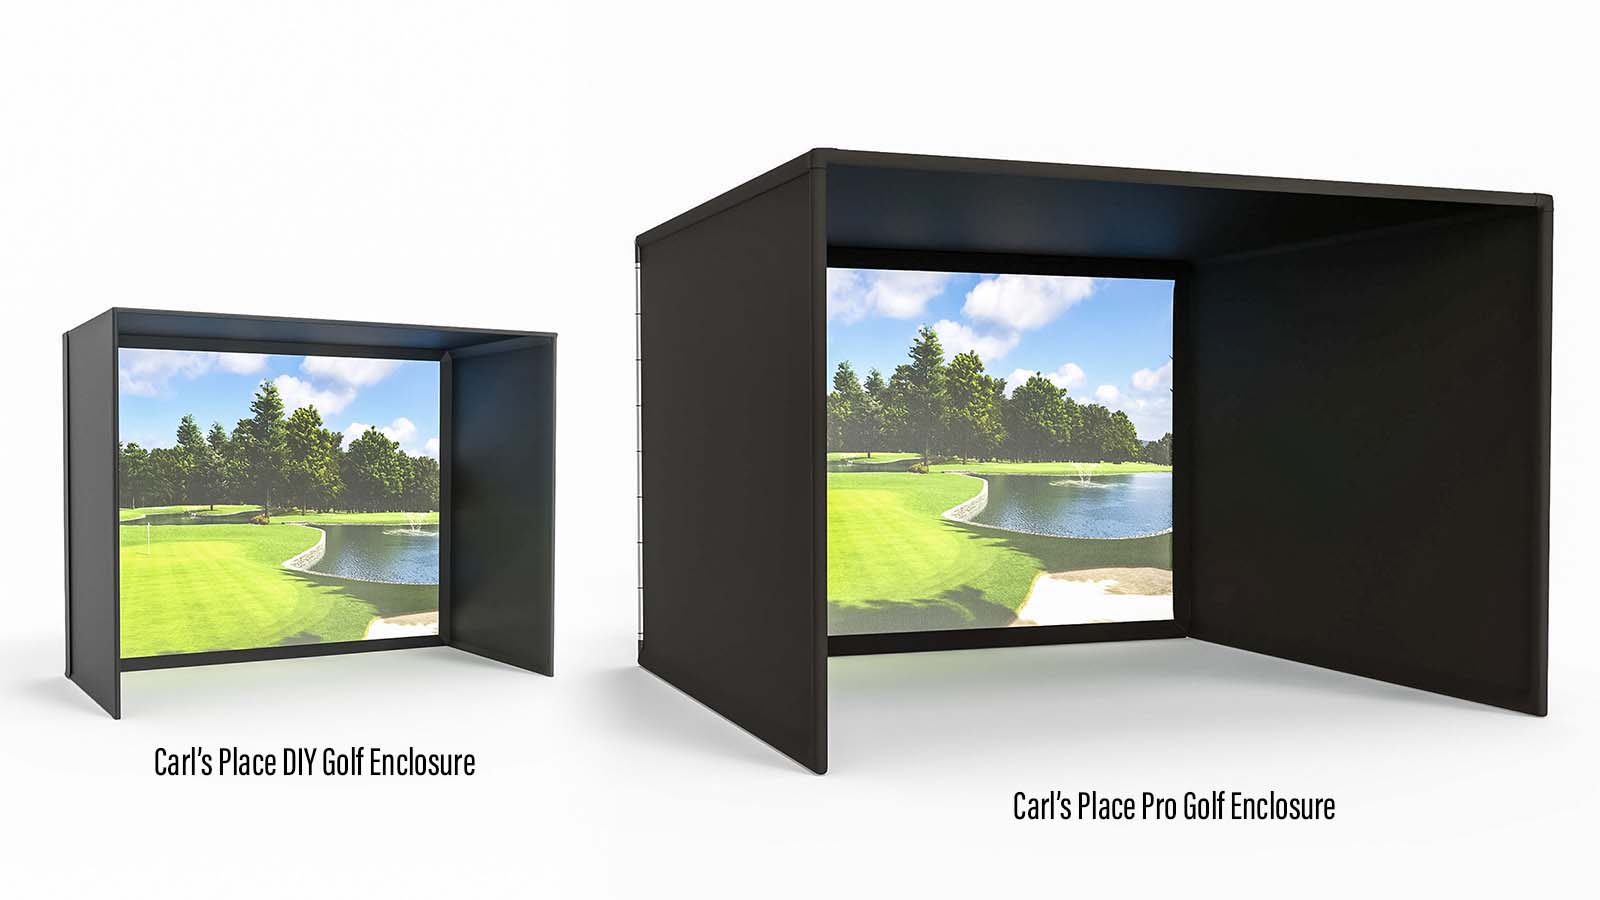 DIY vs. Pro: Which Carl's Place golf simulator enclosure is best for your specific space?